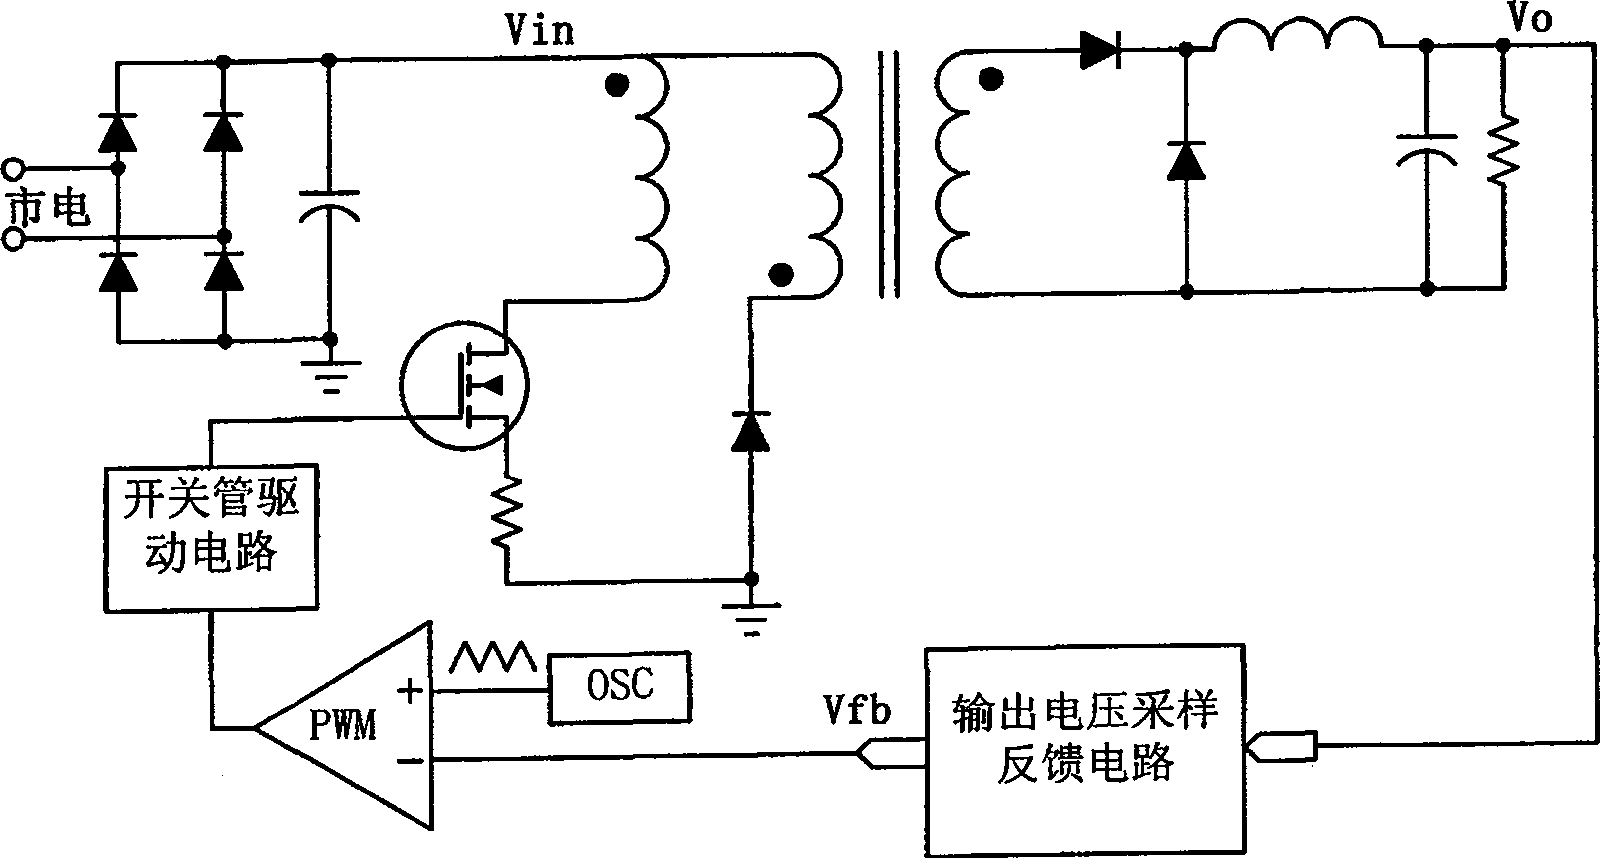 Sample-taking feedback circuit of switch electric power output electric voltage